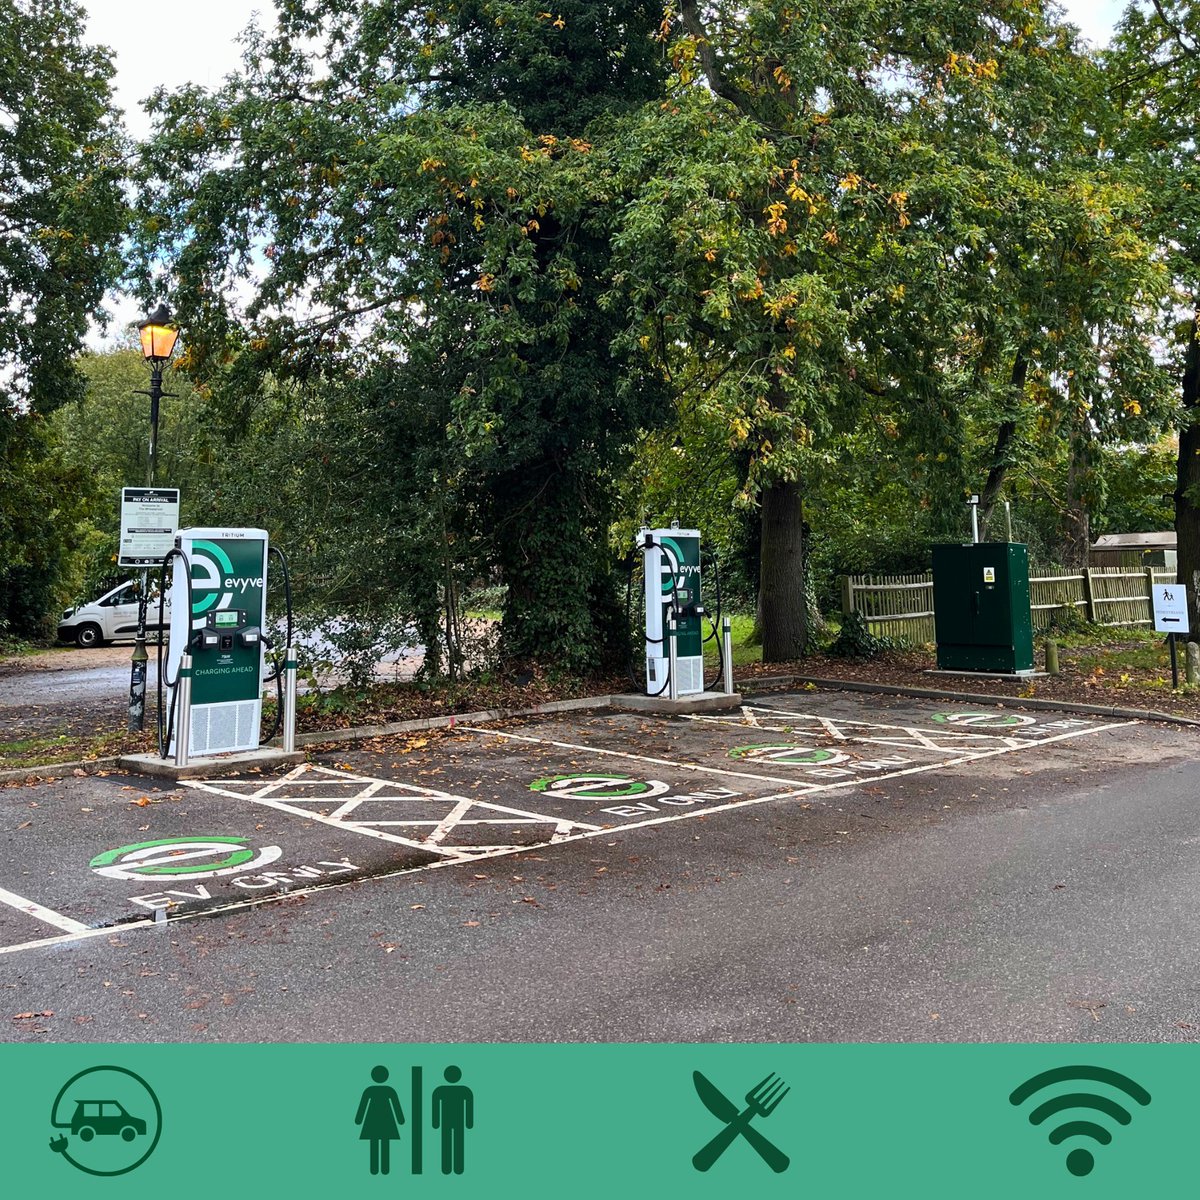 Enjoy free Wi-Fi, clean restrooms, comfortable seating, and delicious snacks at all our charging stations ⚡ 

Find your nearest charge  👉 evyve.co.uk/locations/

#Evyve #EV #SustainableCharging #EVCharging #ElectricVehicle #ElectricCharging #EVChargers #Sustainability